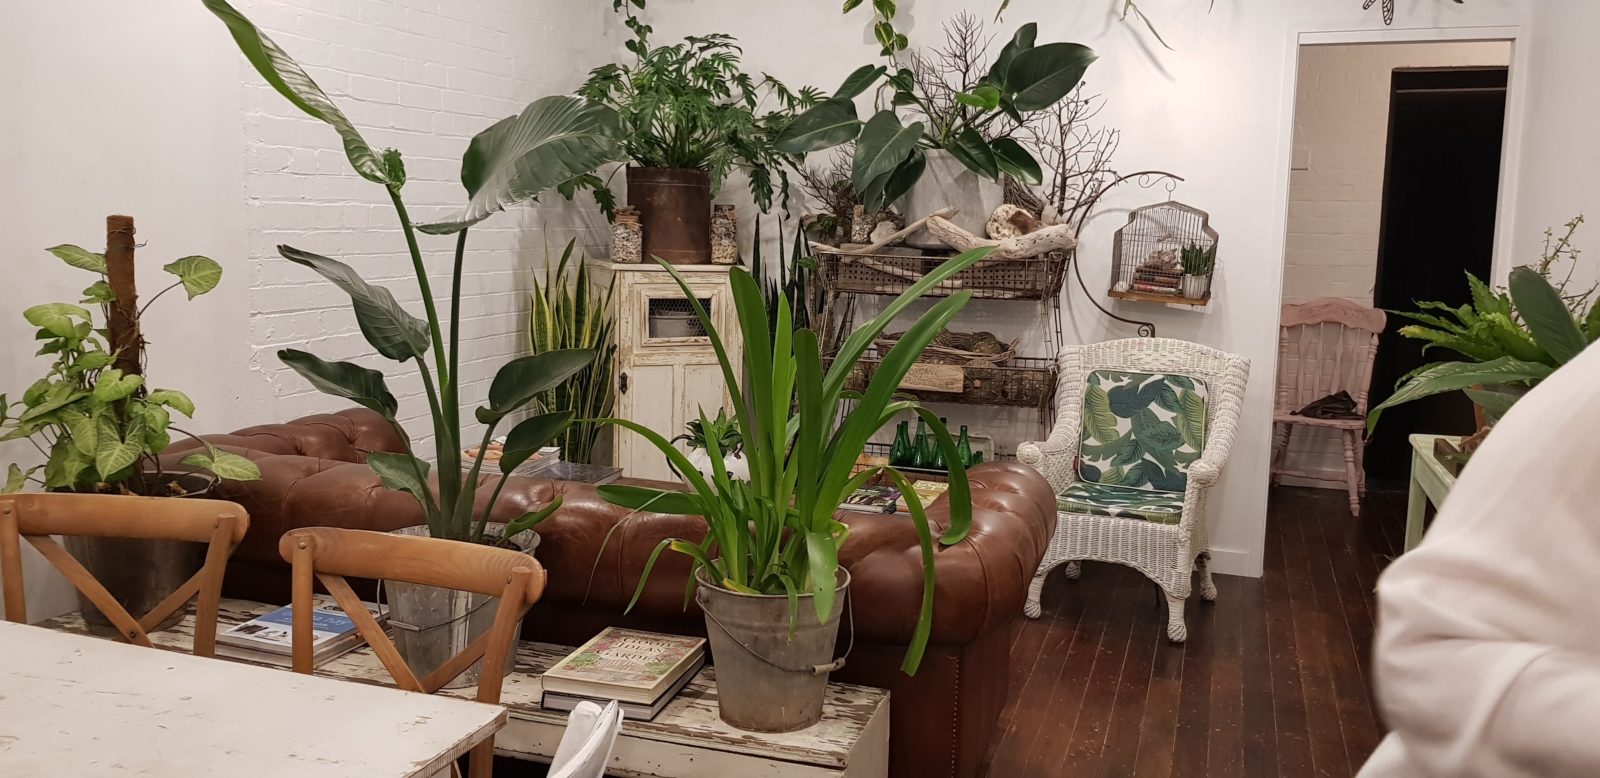 Sit on our beautiful leather lounge surrounded by greenery and vintage wares